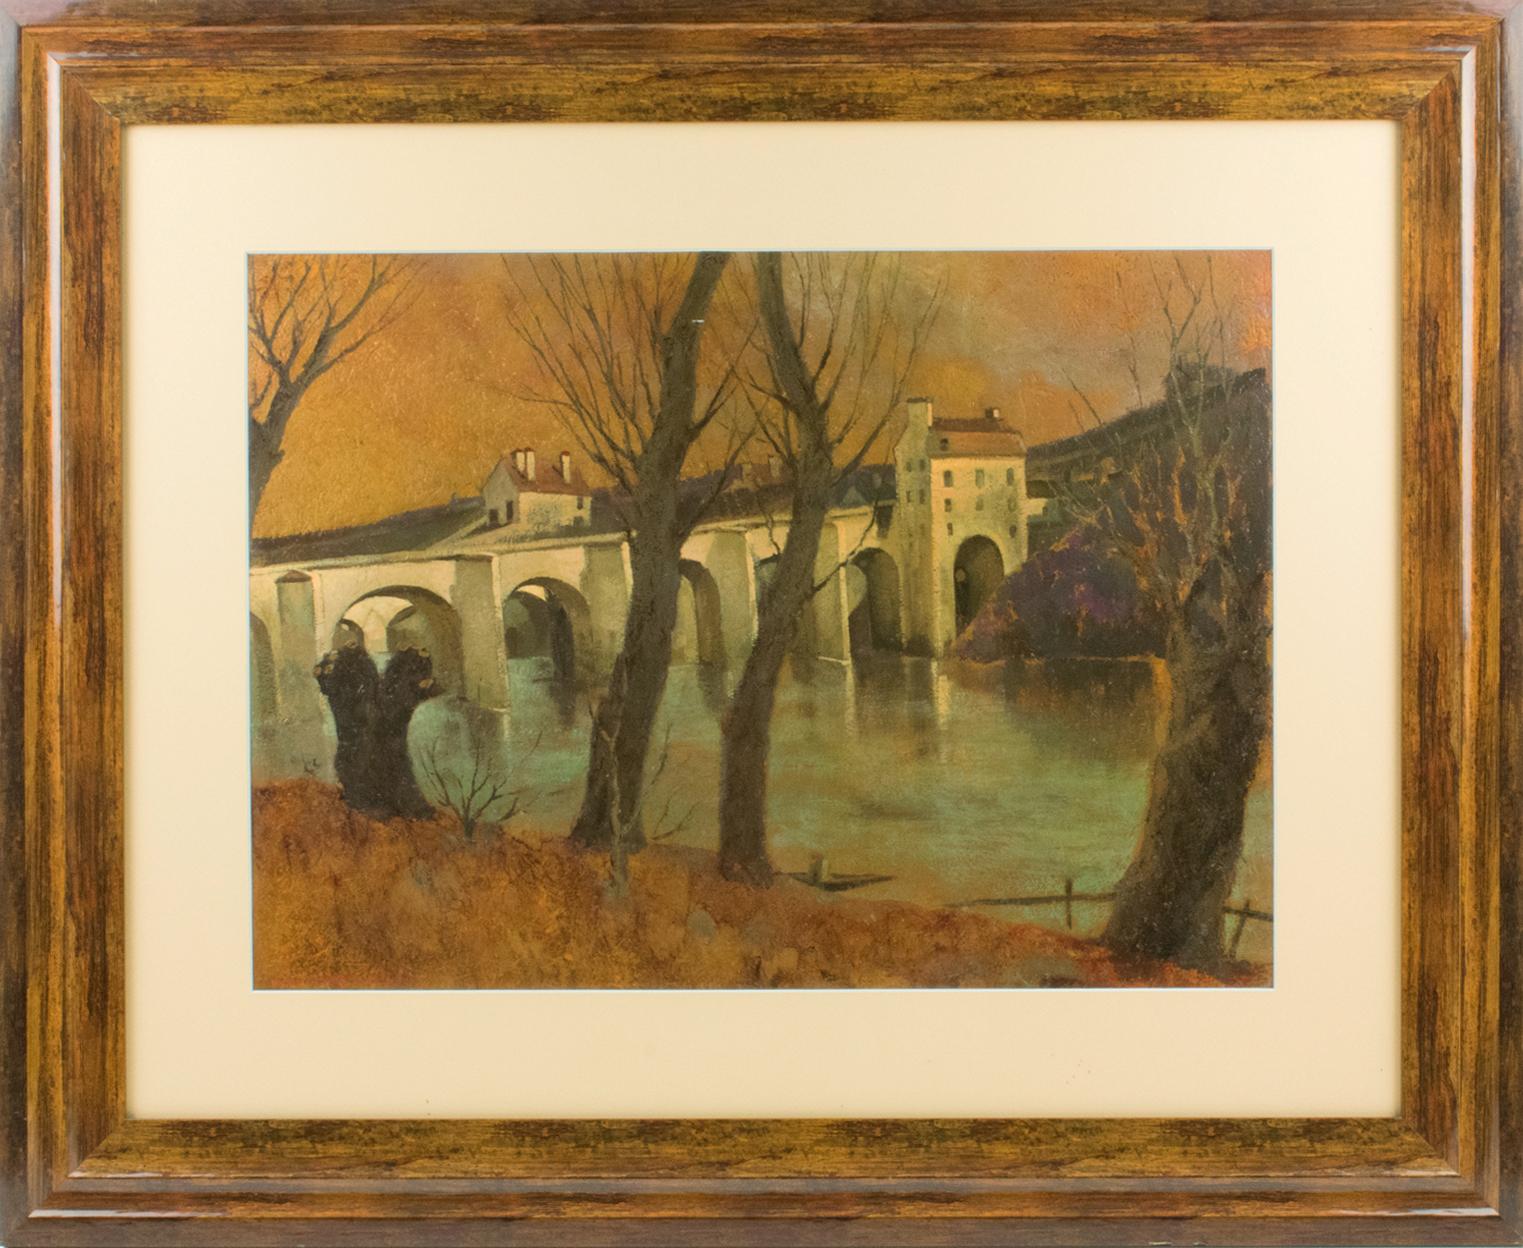 Vincent Mazzocchini (France, 20th Century) created this unique French landscape oil on pressed wood board painting. 
This delightful composition is on rather unusual media. The landscape represents an old vaulted bridge from the Middle Ages in